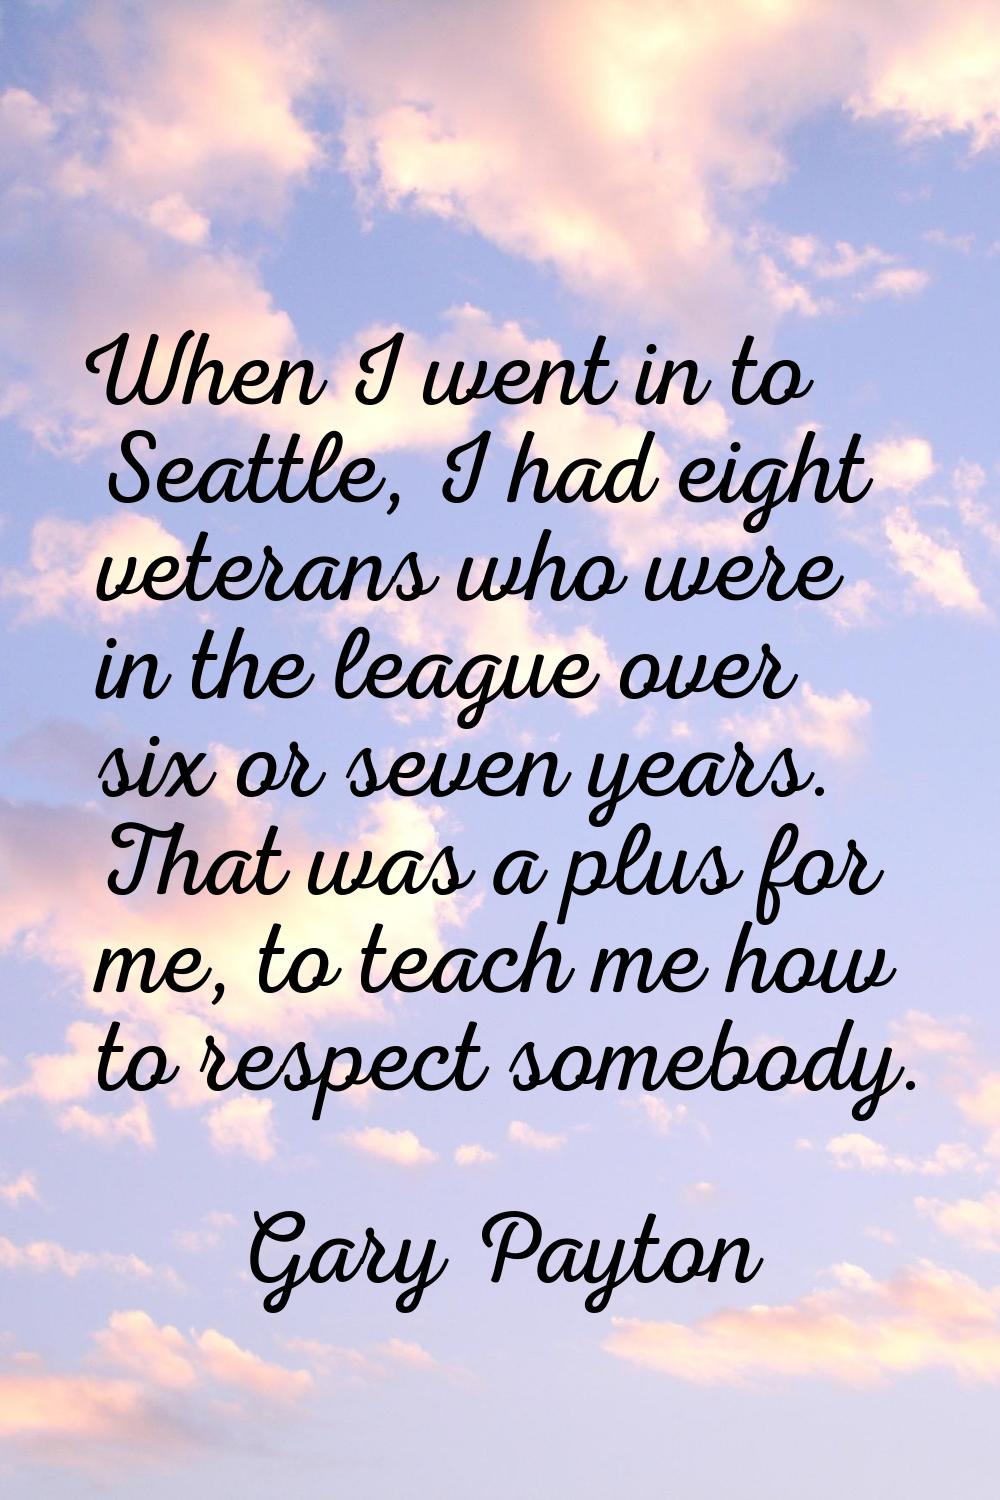 When I went in to Seattle, I had eight veterans who were in the league over six or seven years. Tha